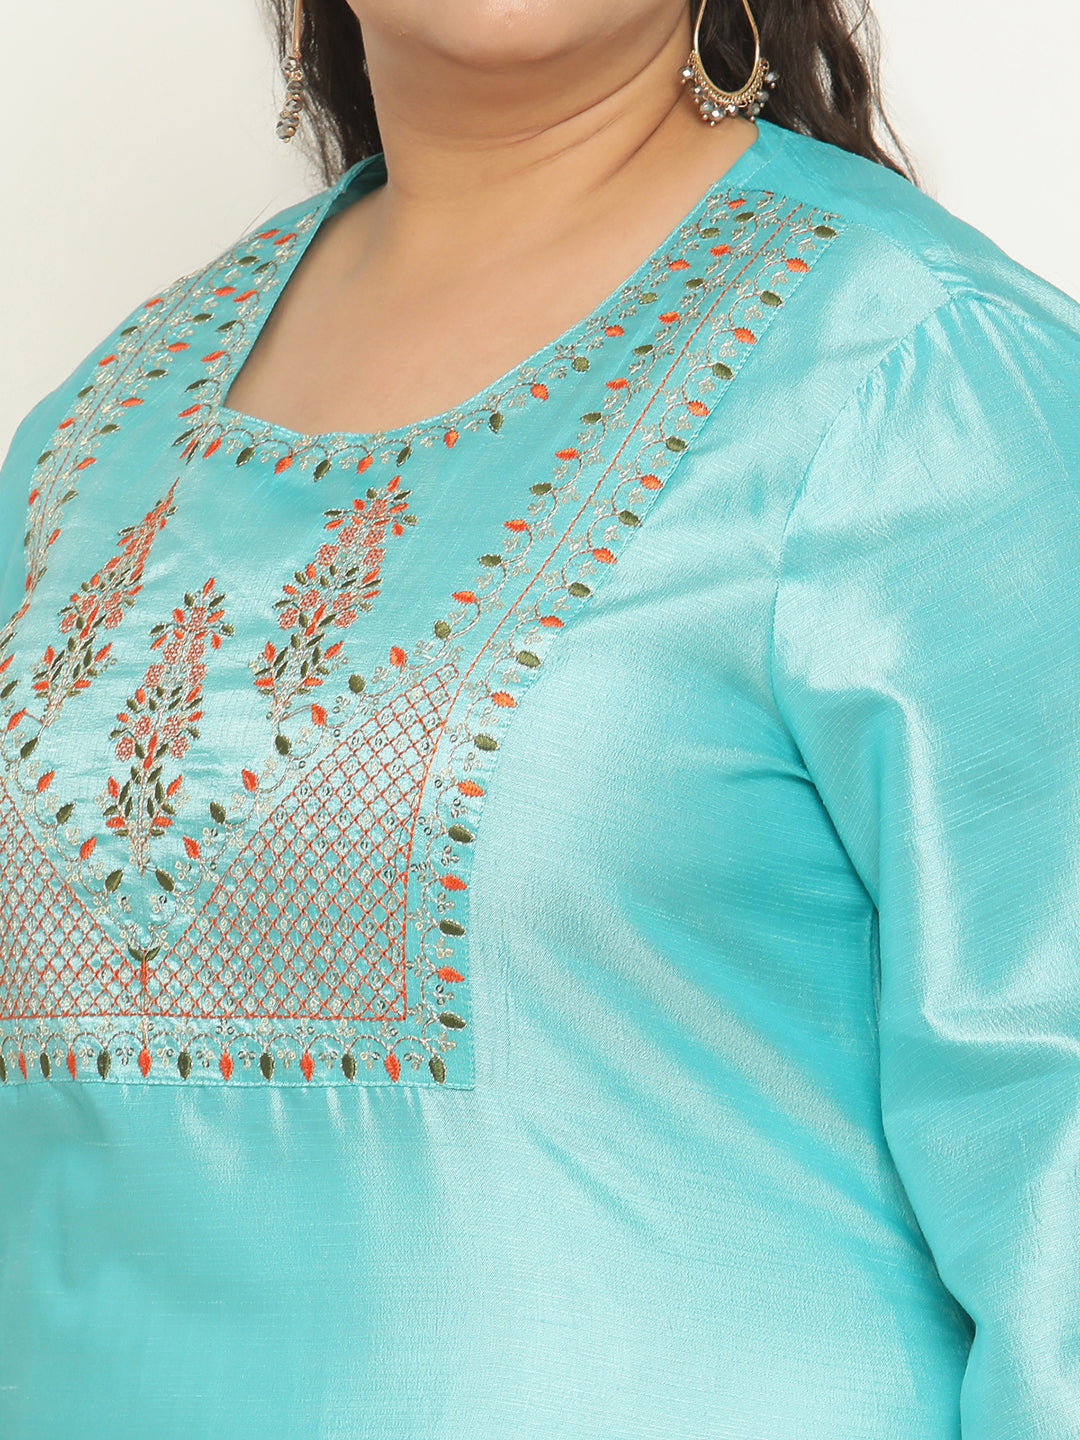 Womens Green Solid Embroidered Plus Size Kurta